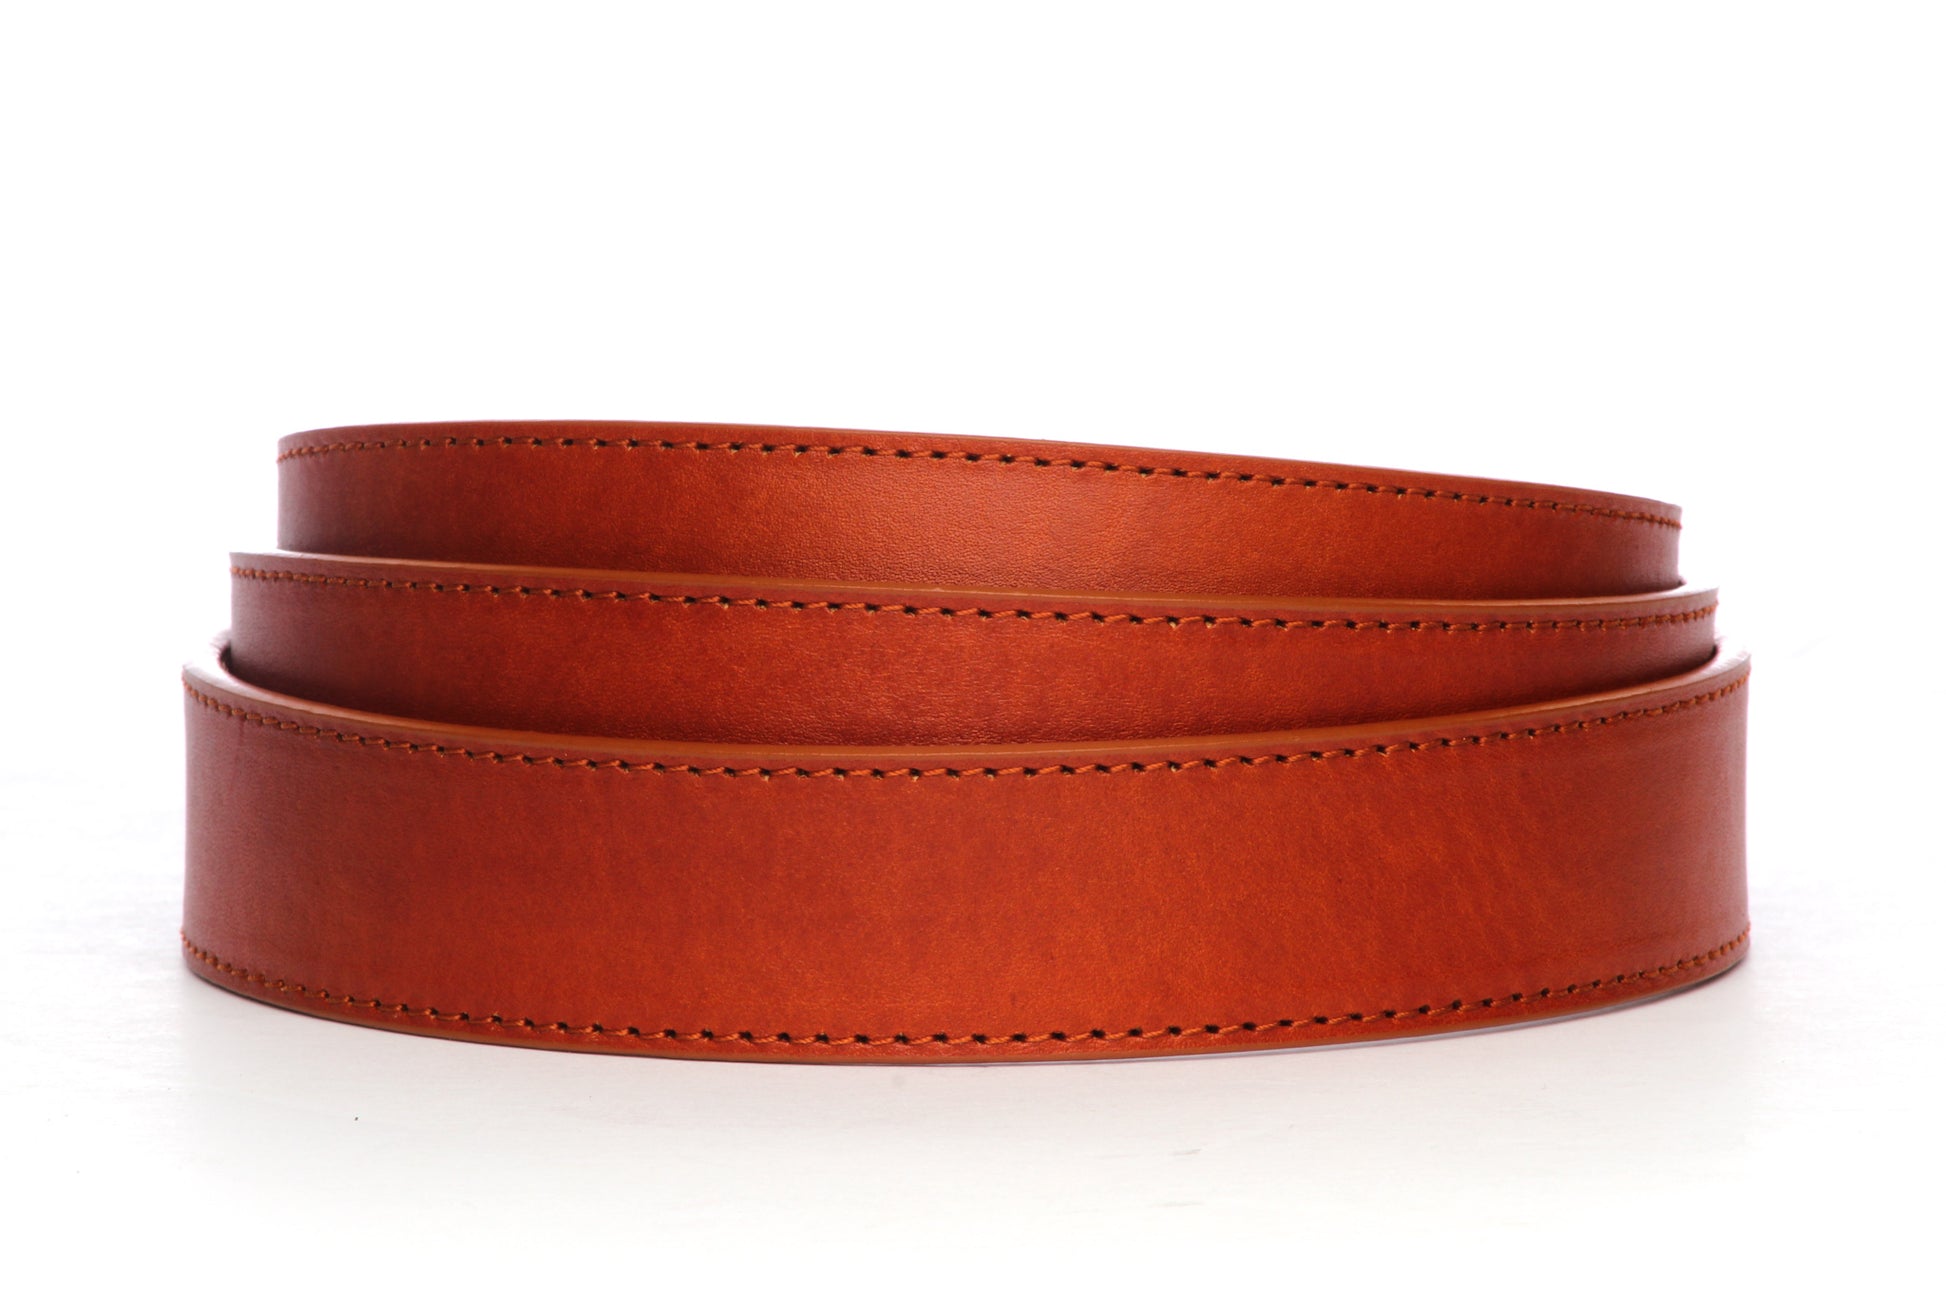 1.25" Saddle Tan Vegetable Tanned Leather Strap - Anson Belt & Buckle